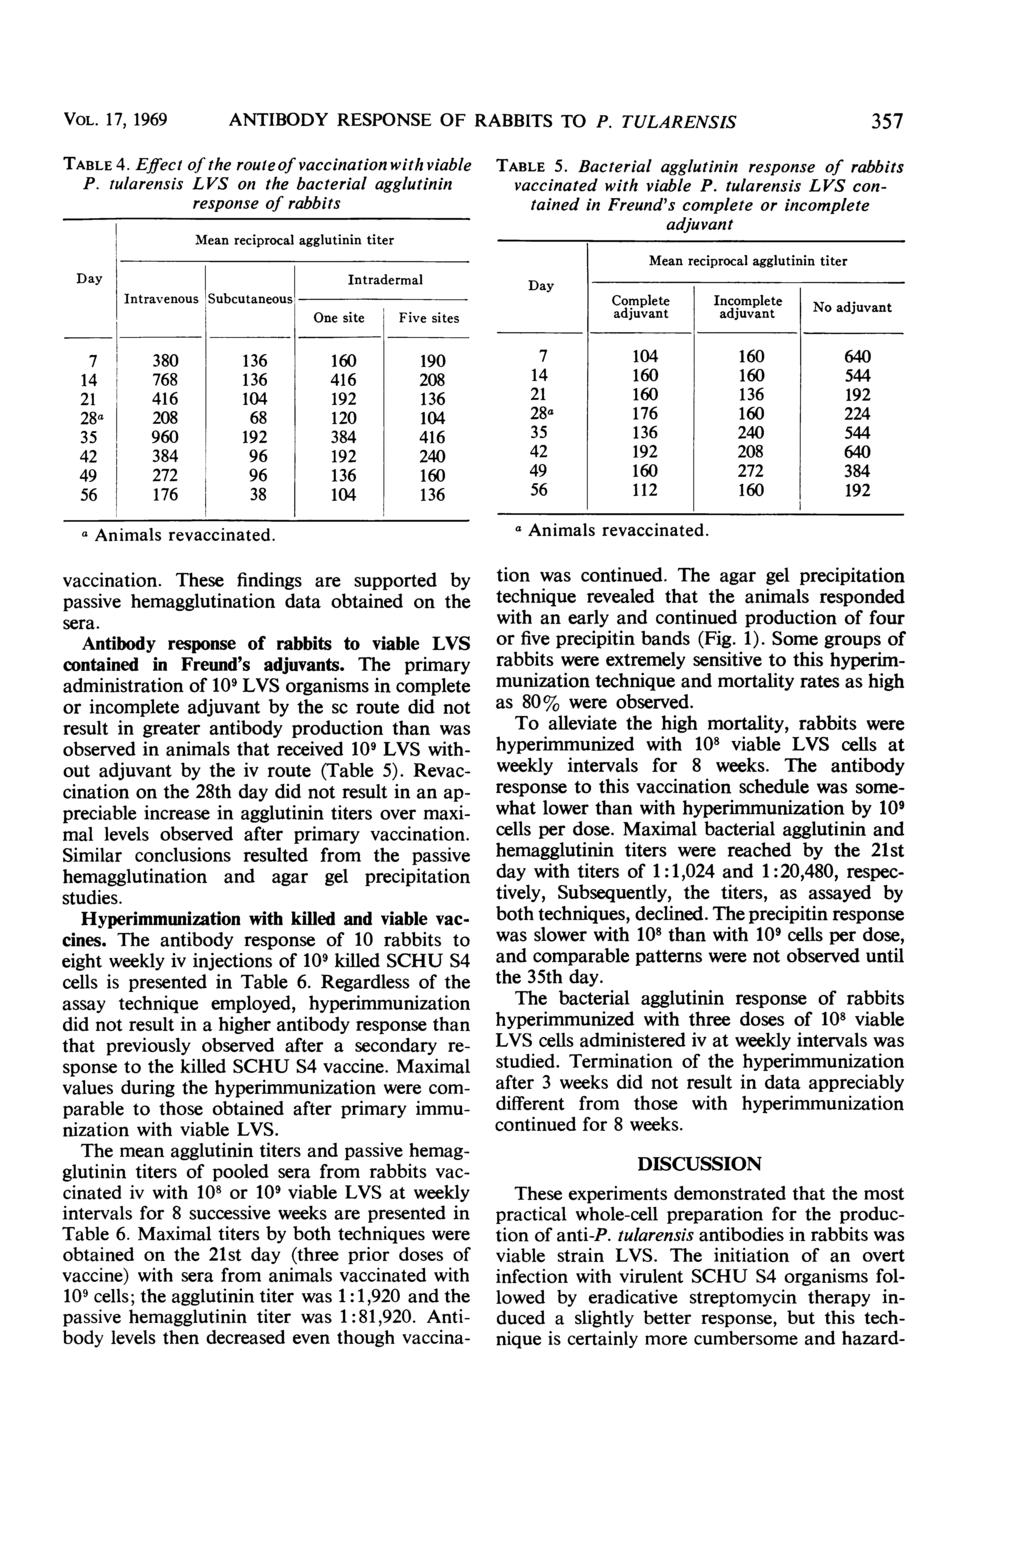 VOL. 17, 1969 ANTIBODY RESPONSE OF RABBITS TO P. TULARENSIS 357 TABLE 4. Effect of the route of vaccination with viable P.